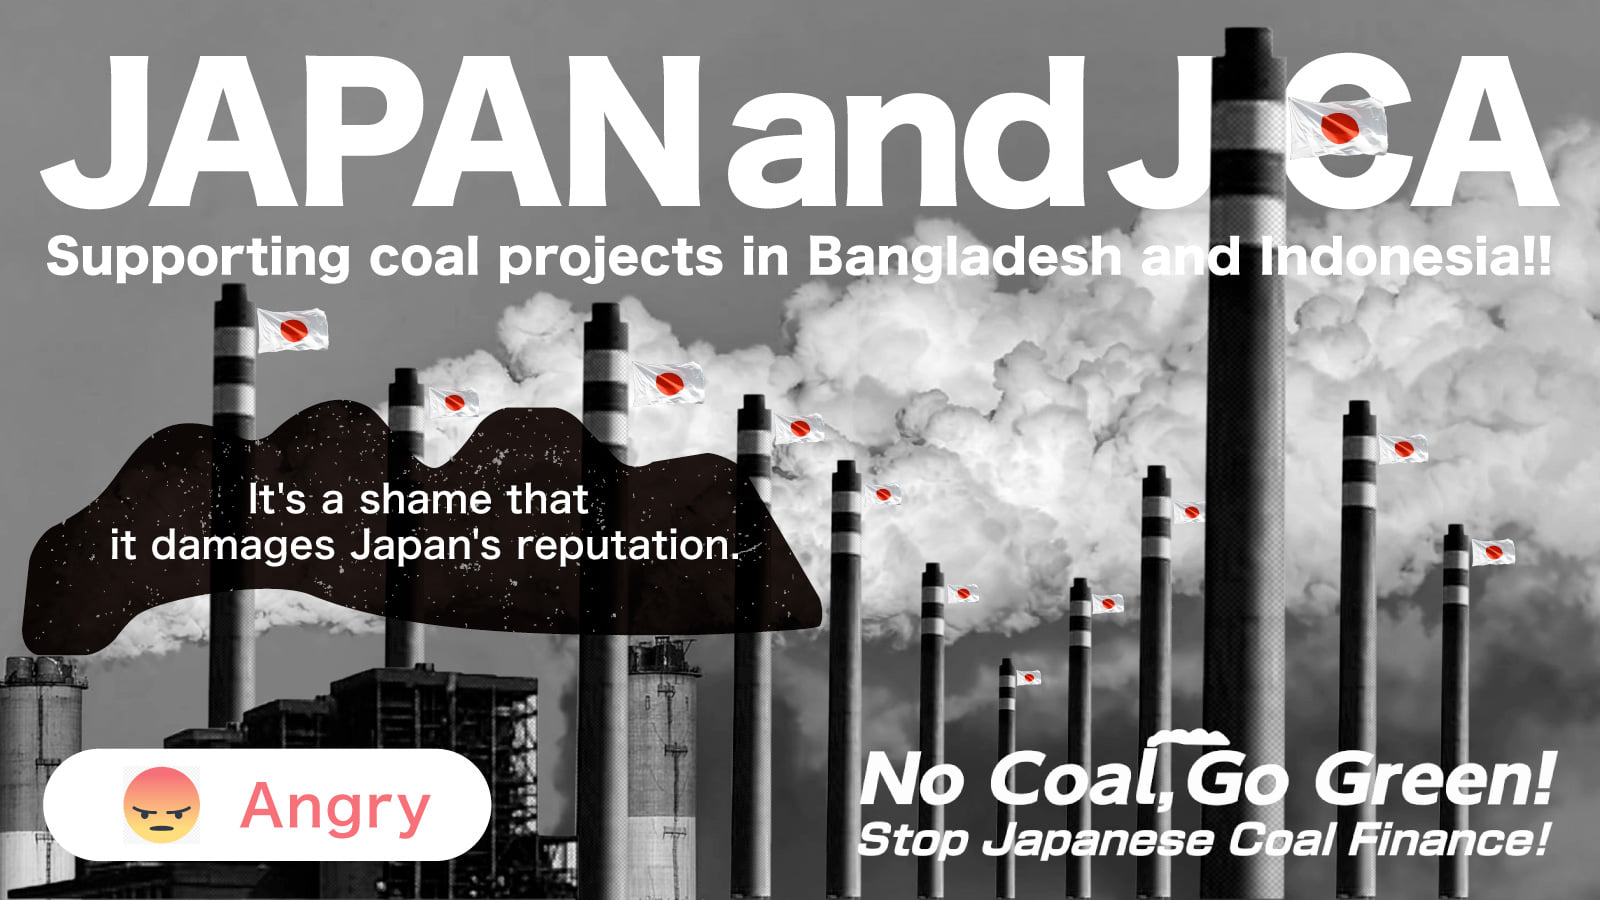 Environmental NGOs released a joint statement welcoming this step towards decarbonization but are continuing to call on the Japanese government to end support for coal projects in Indonesia and Bangladesh. 